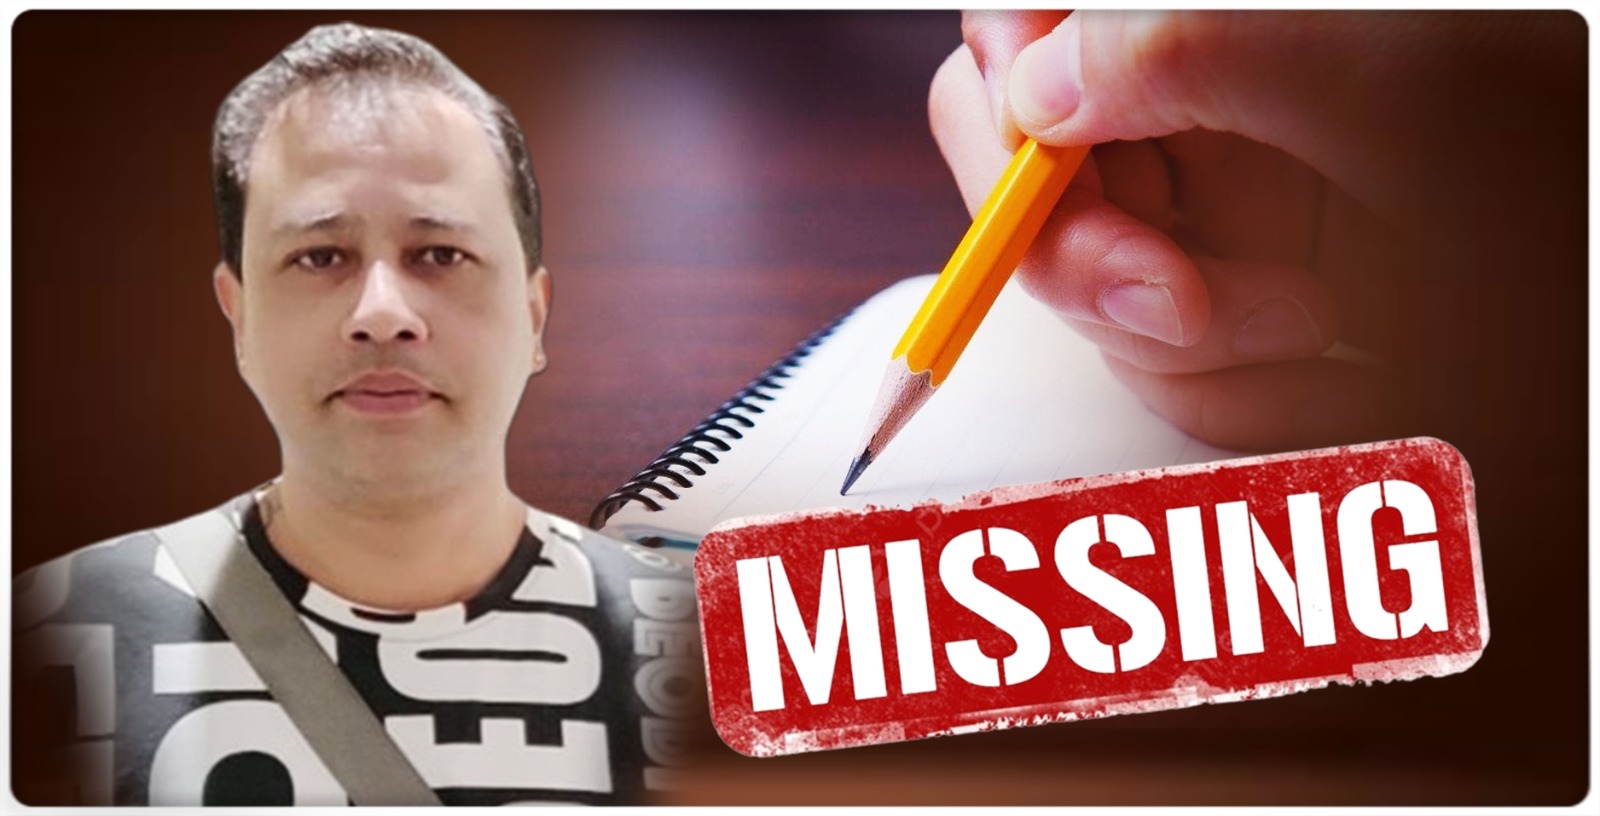 Man Goes Missing In Guwahati, Leaves behind Note for Family